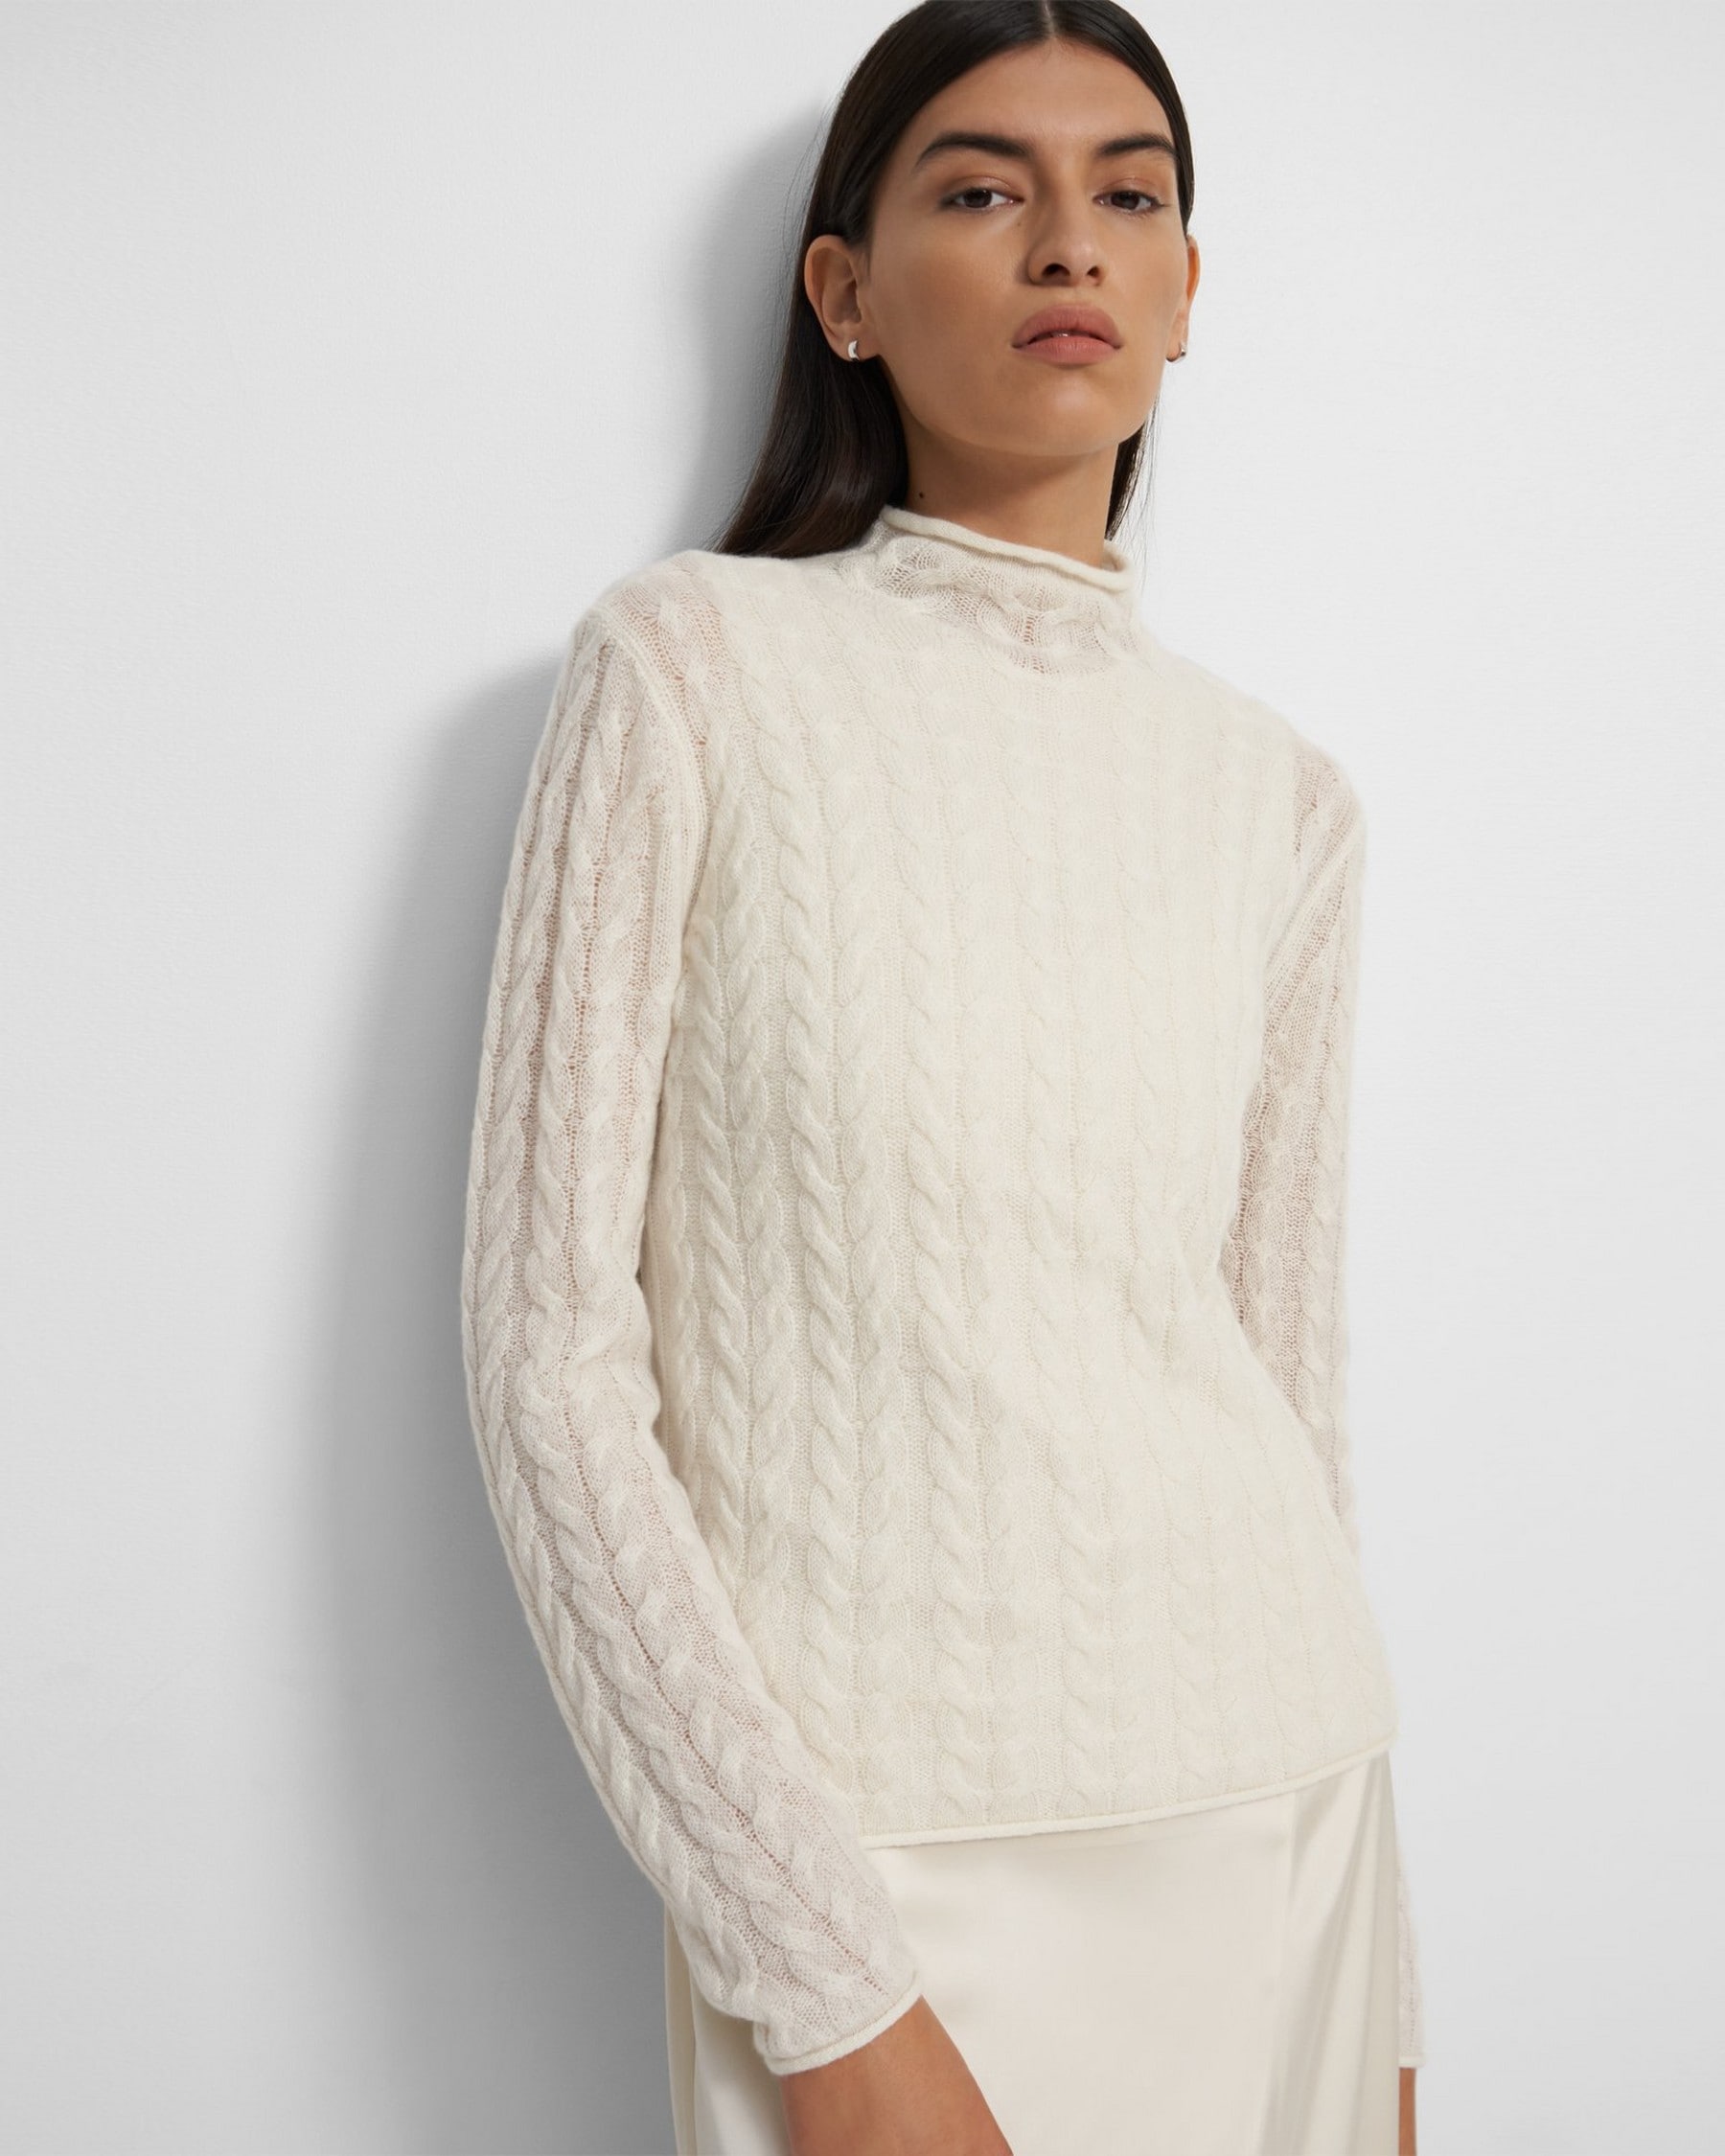 CABLE MOCK NECK